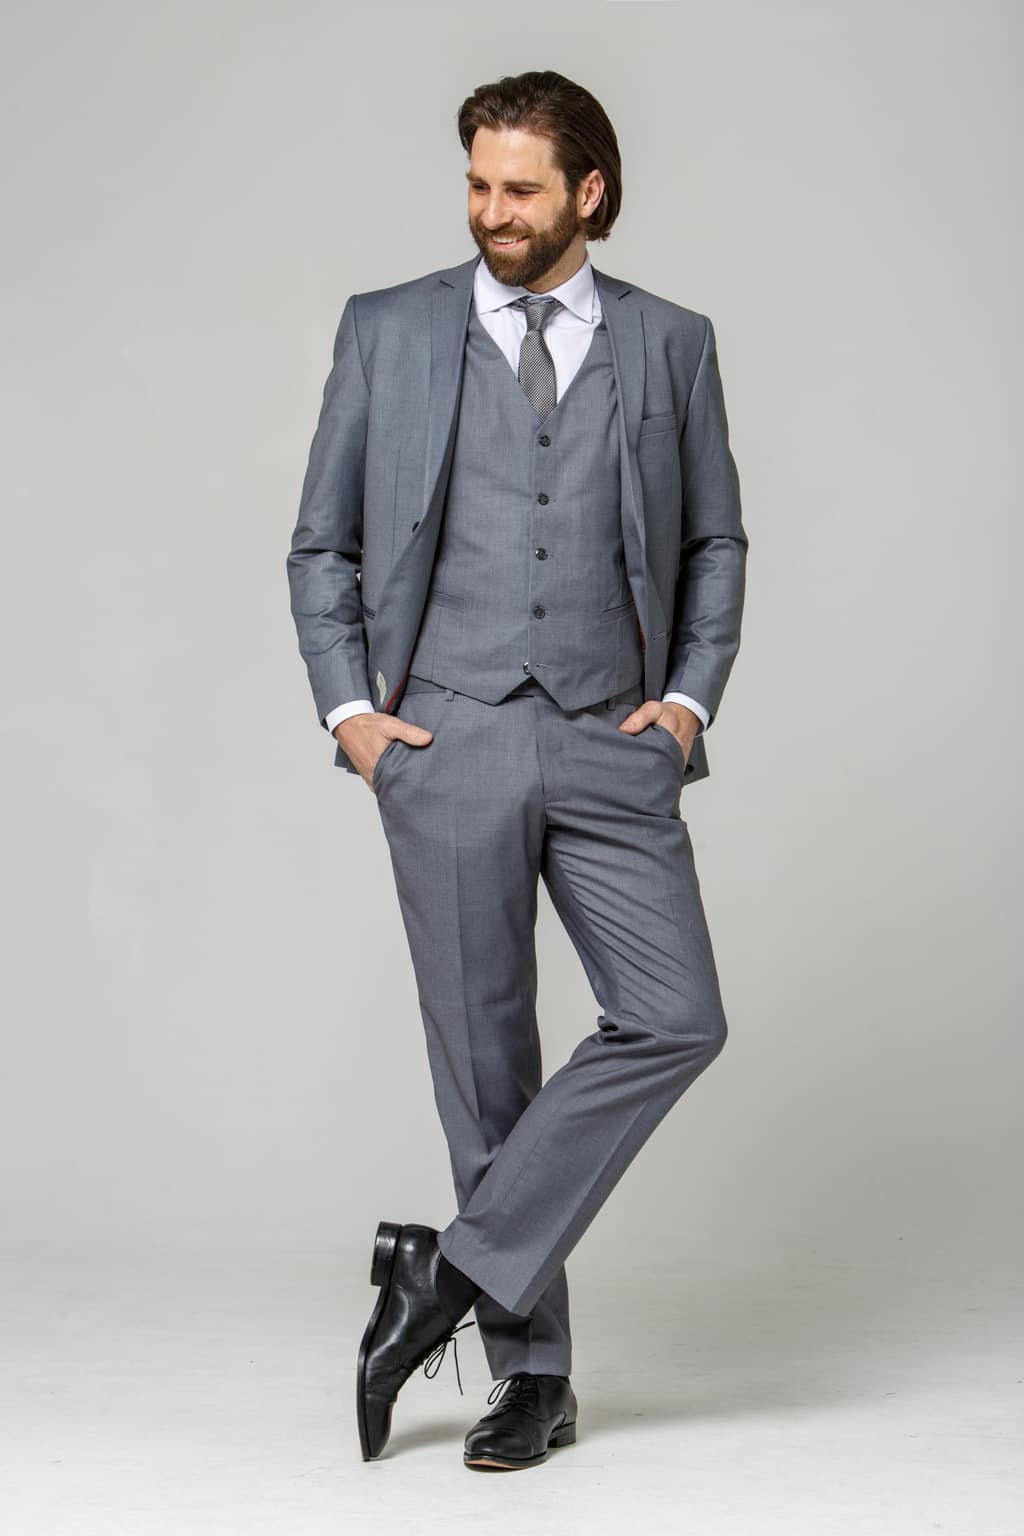 Tailor Made Suit, Auckland CBD, Queen street, Auckland, North Shore, ALbany, Local Business, Fully Tailoring, Made to measure, ready to wear, Gray Suit Hire - Queen Street Suit Hire